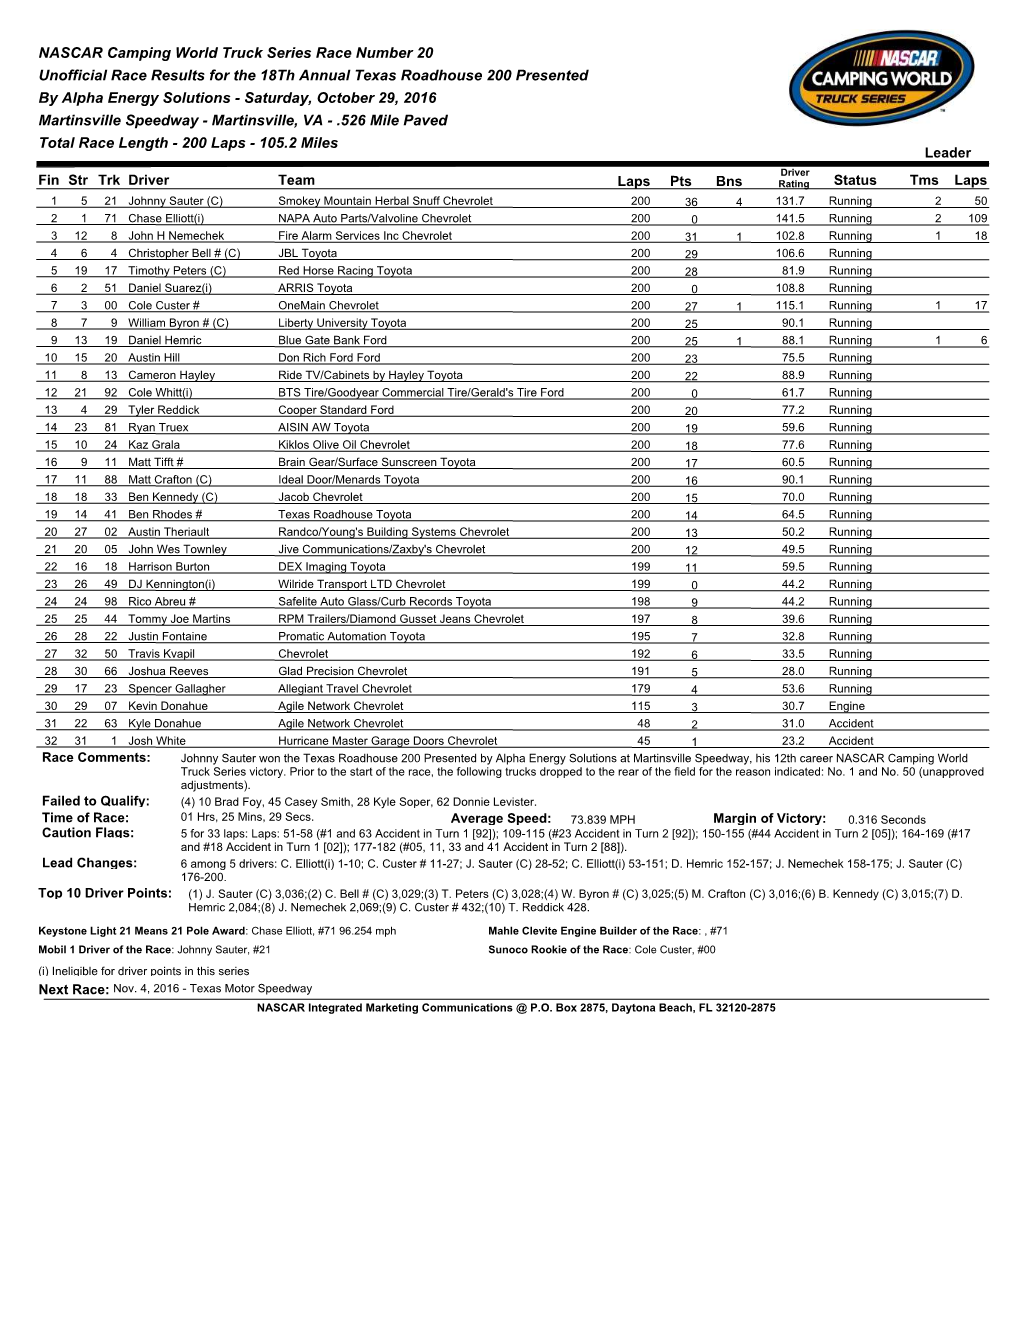 NASCAR Camping World Truck Series Race Number 20 Unofficial